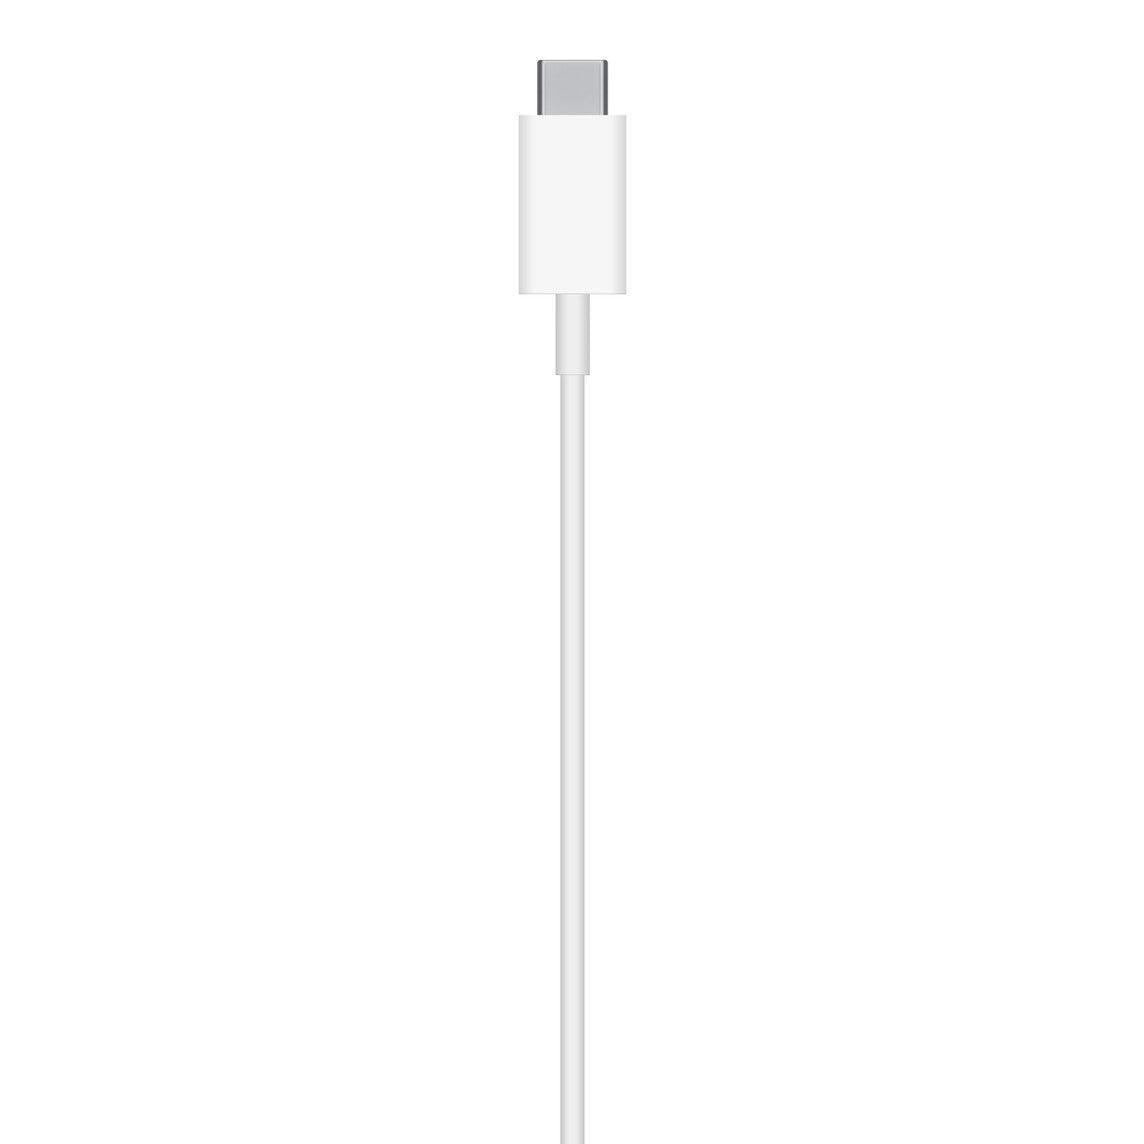 Apple MagSafe Charger - iGadget Store